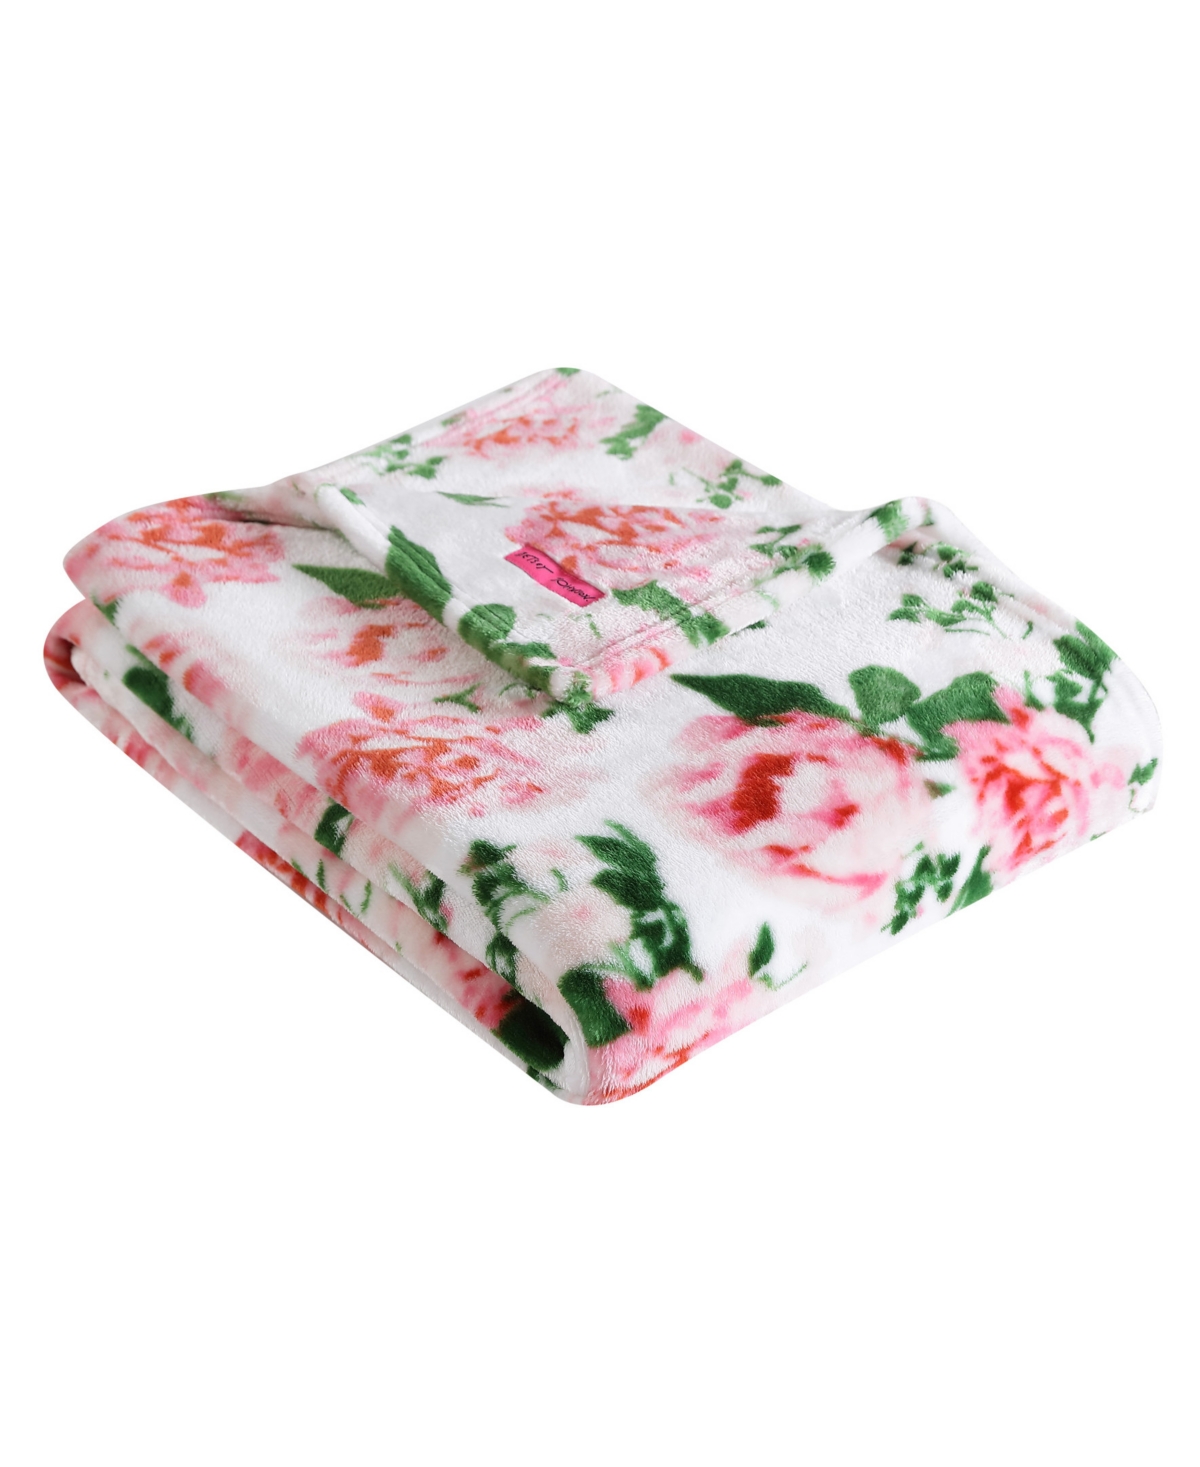 Betsey Johnson Blooming Roses Blanket, Twin Bedding In Blush